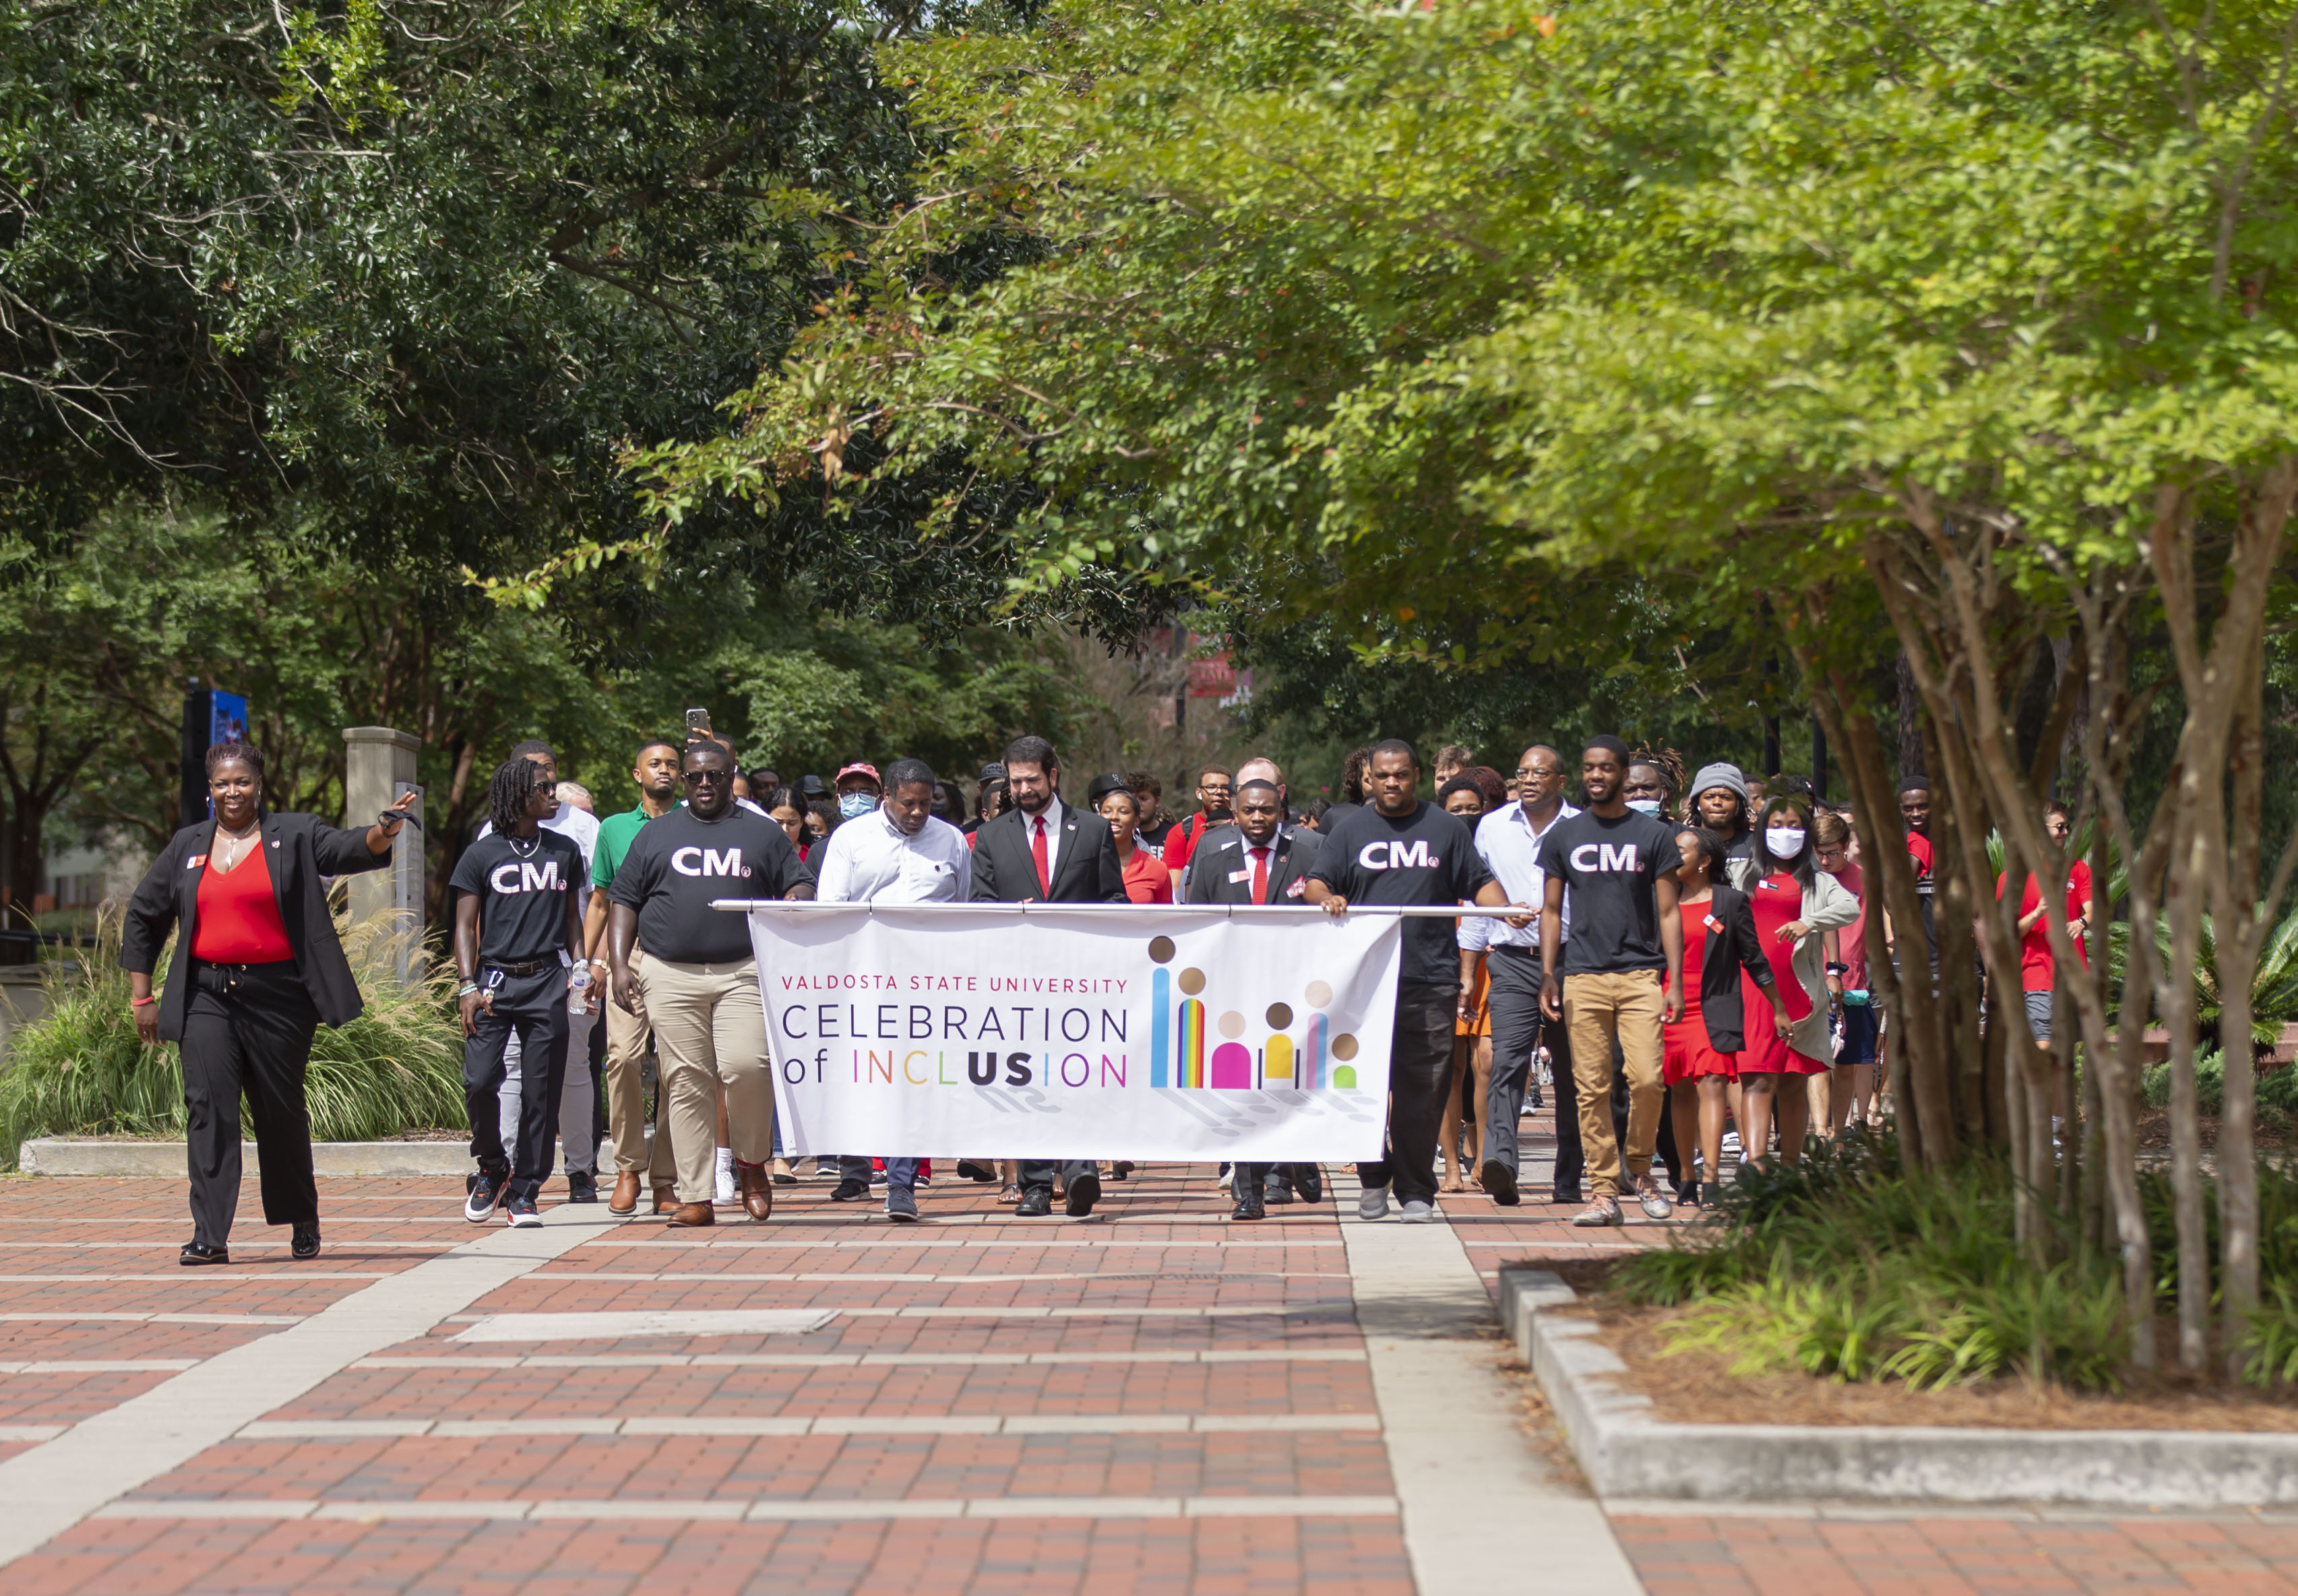 Unity Walk that was part of the 2021 Celebration of Inclusion